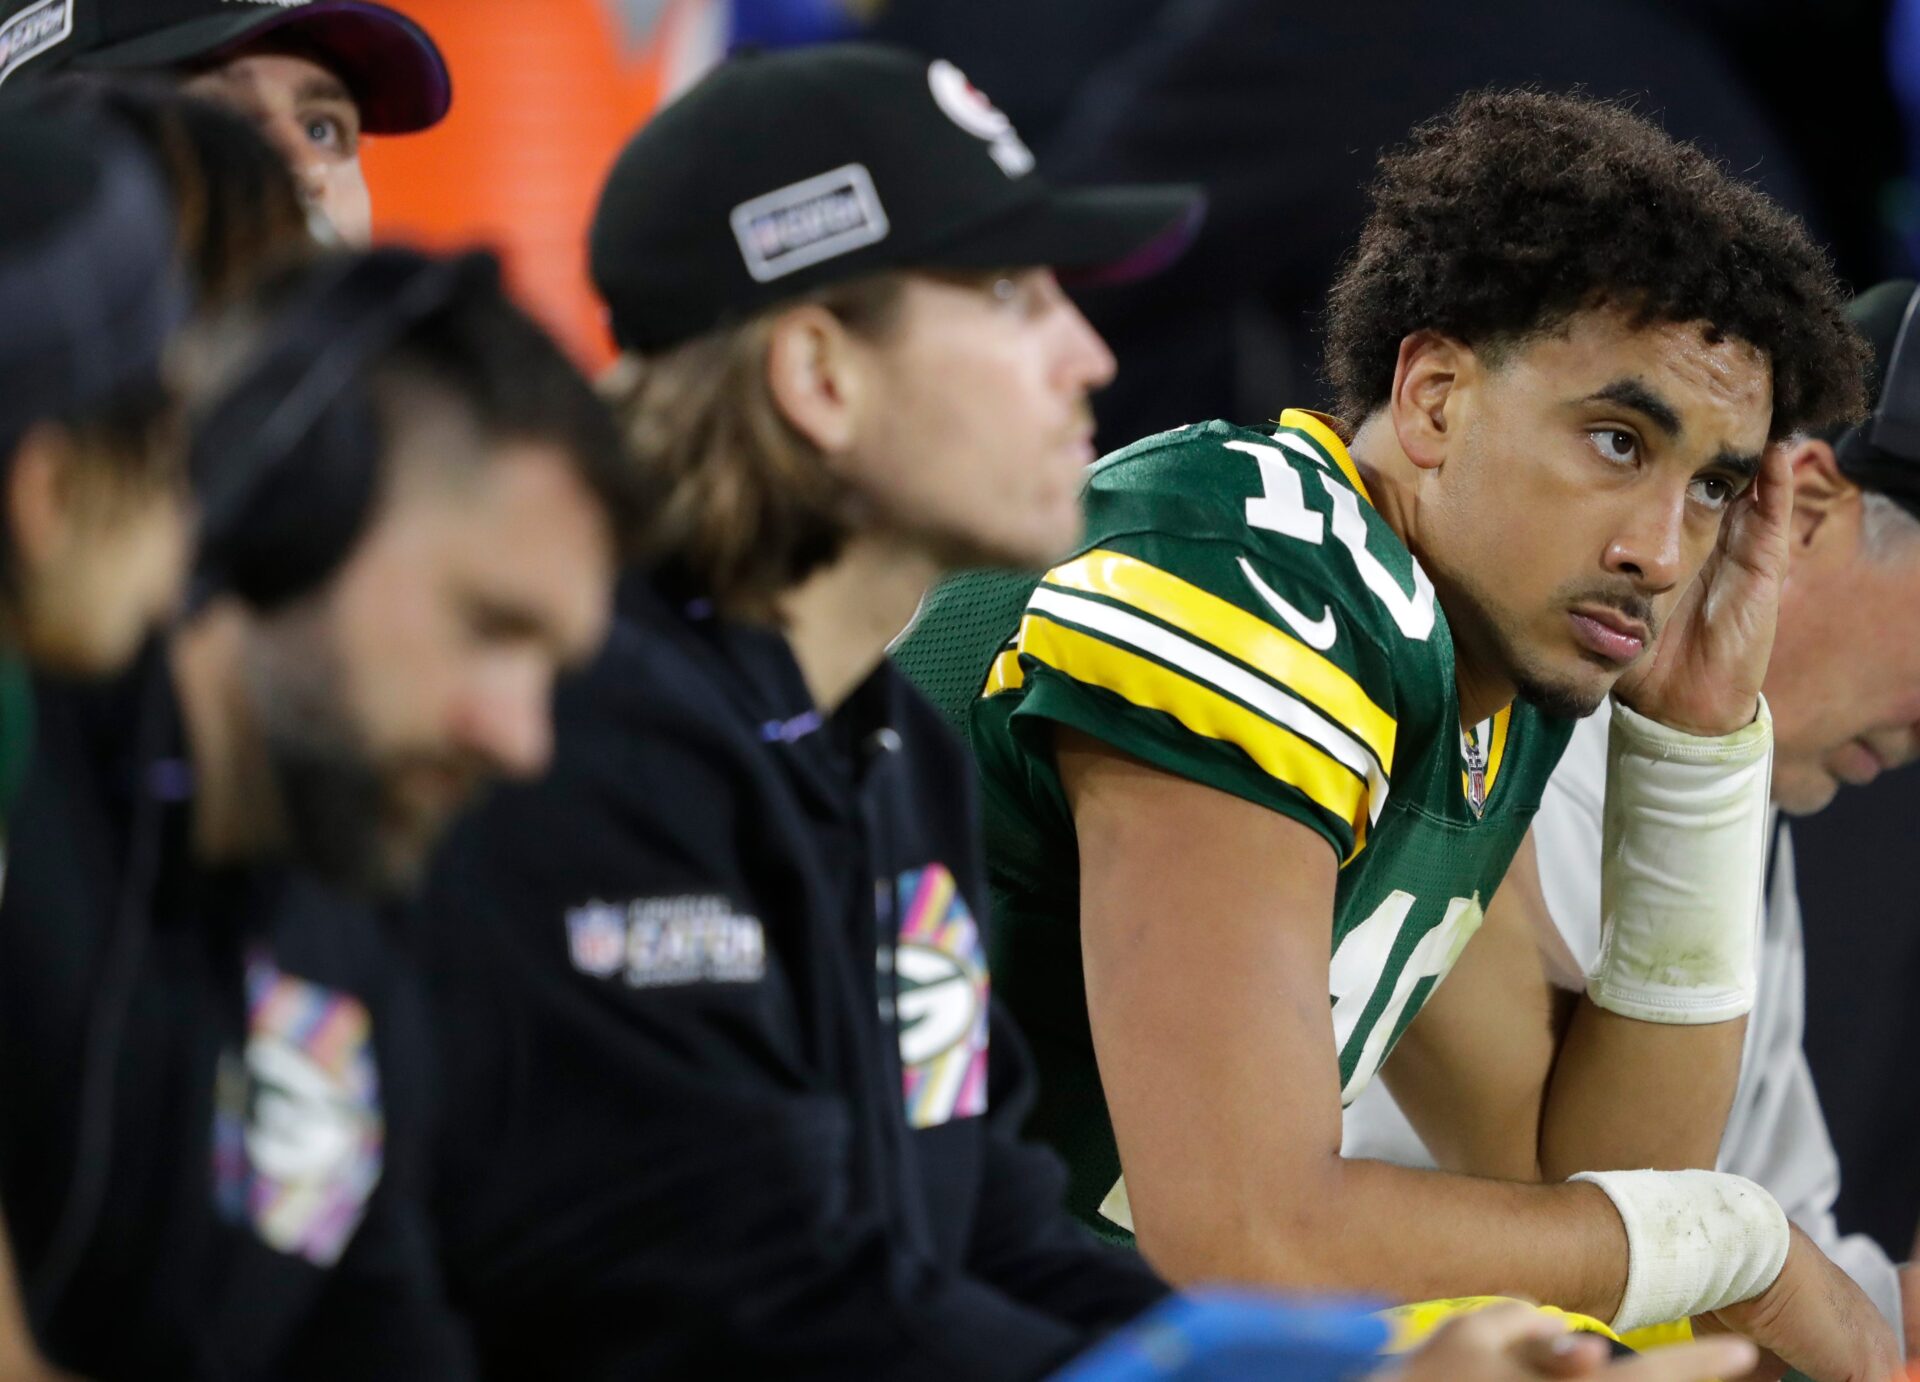 Jordan Love sits on the Packers bench with his helmet off